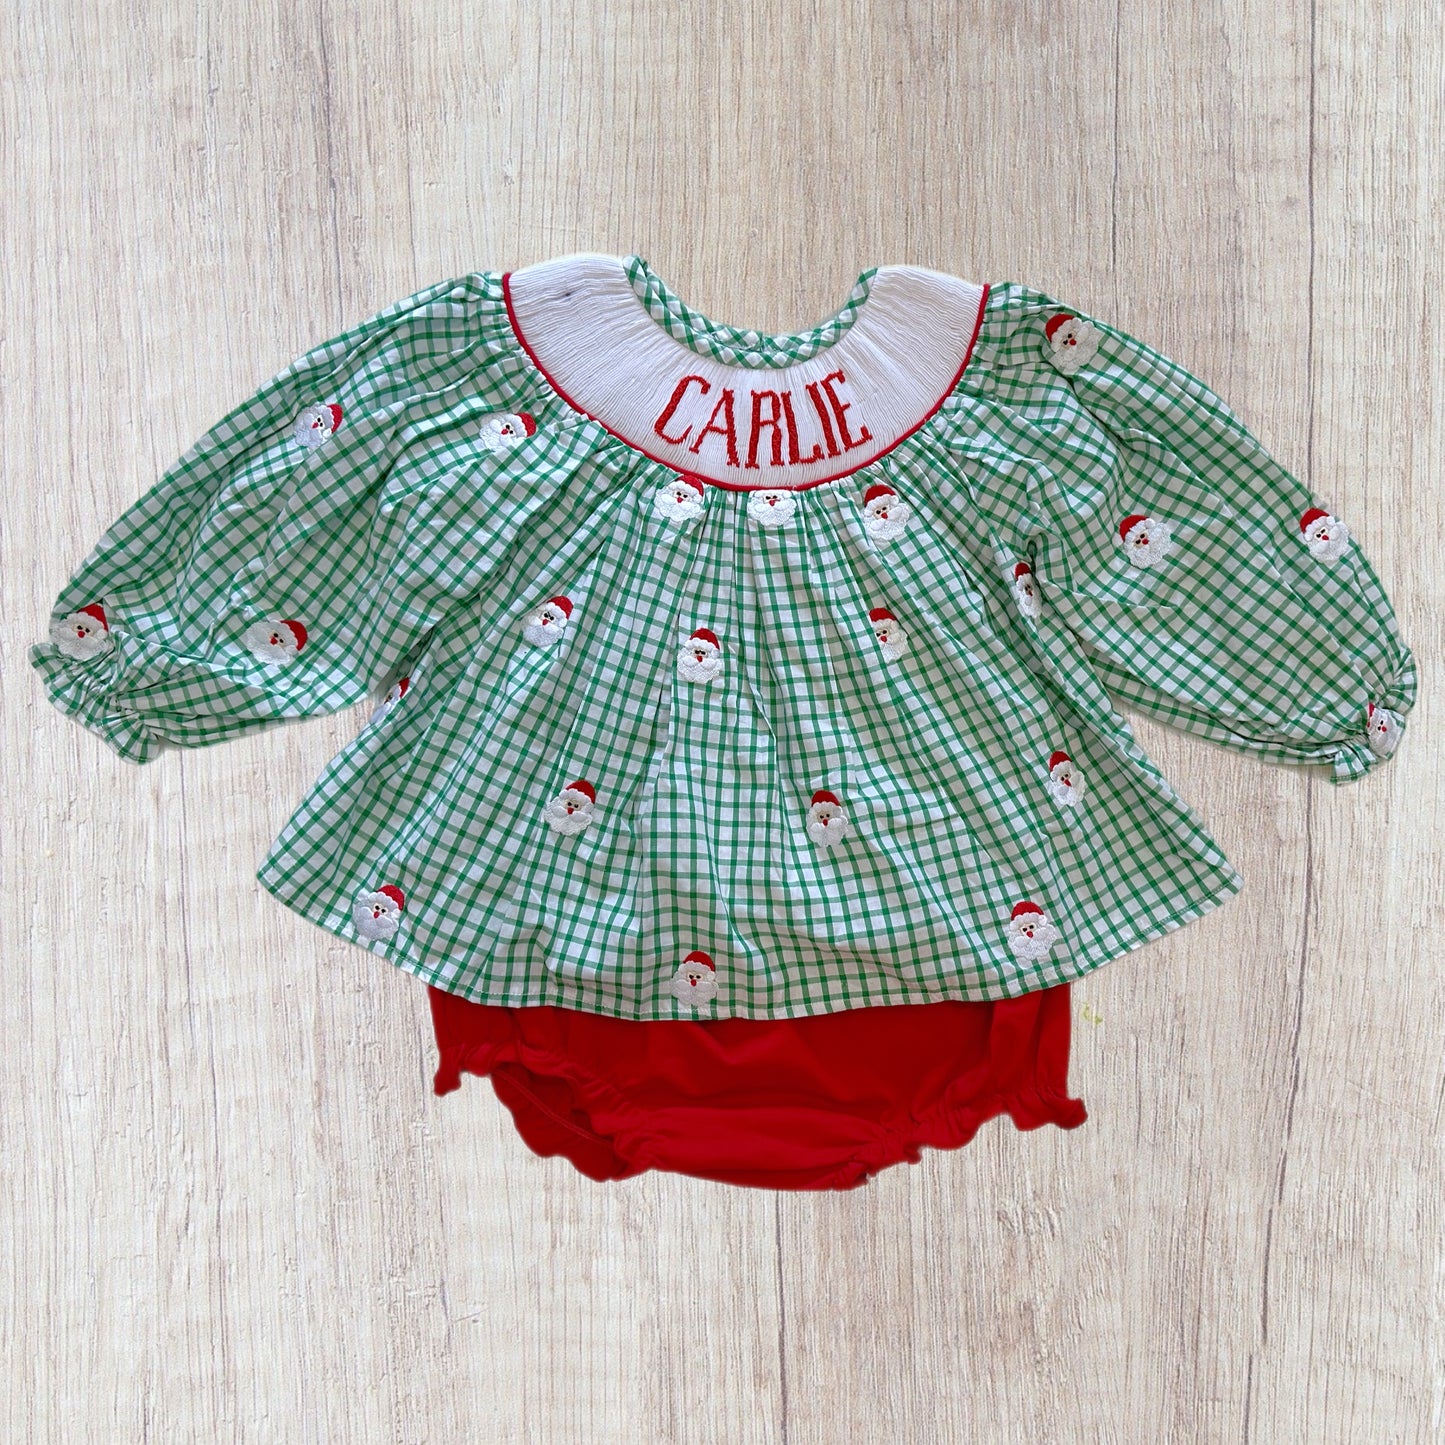 24M “Carlie” Santa Smock Bloomer Set With Imperfection (RTS)